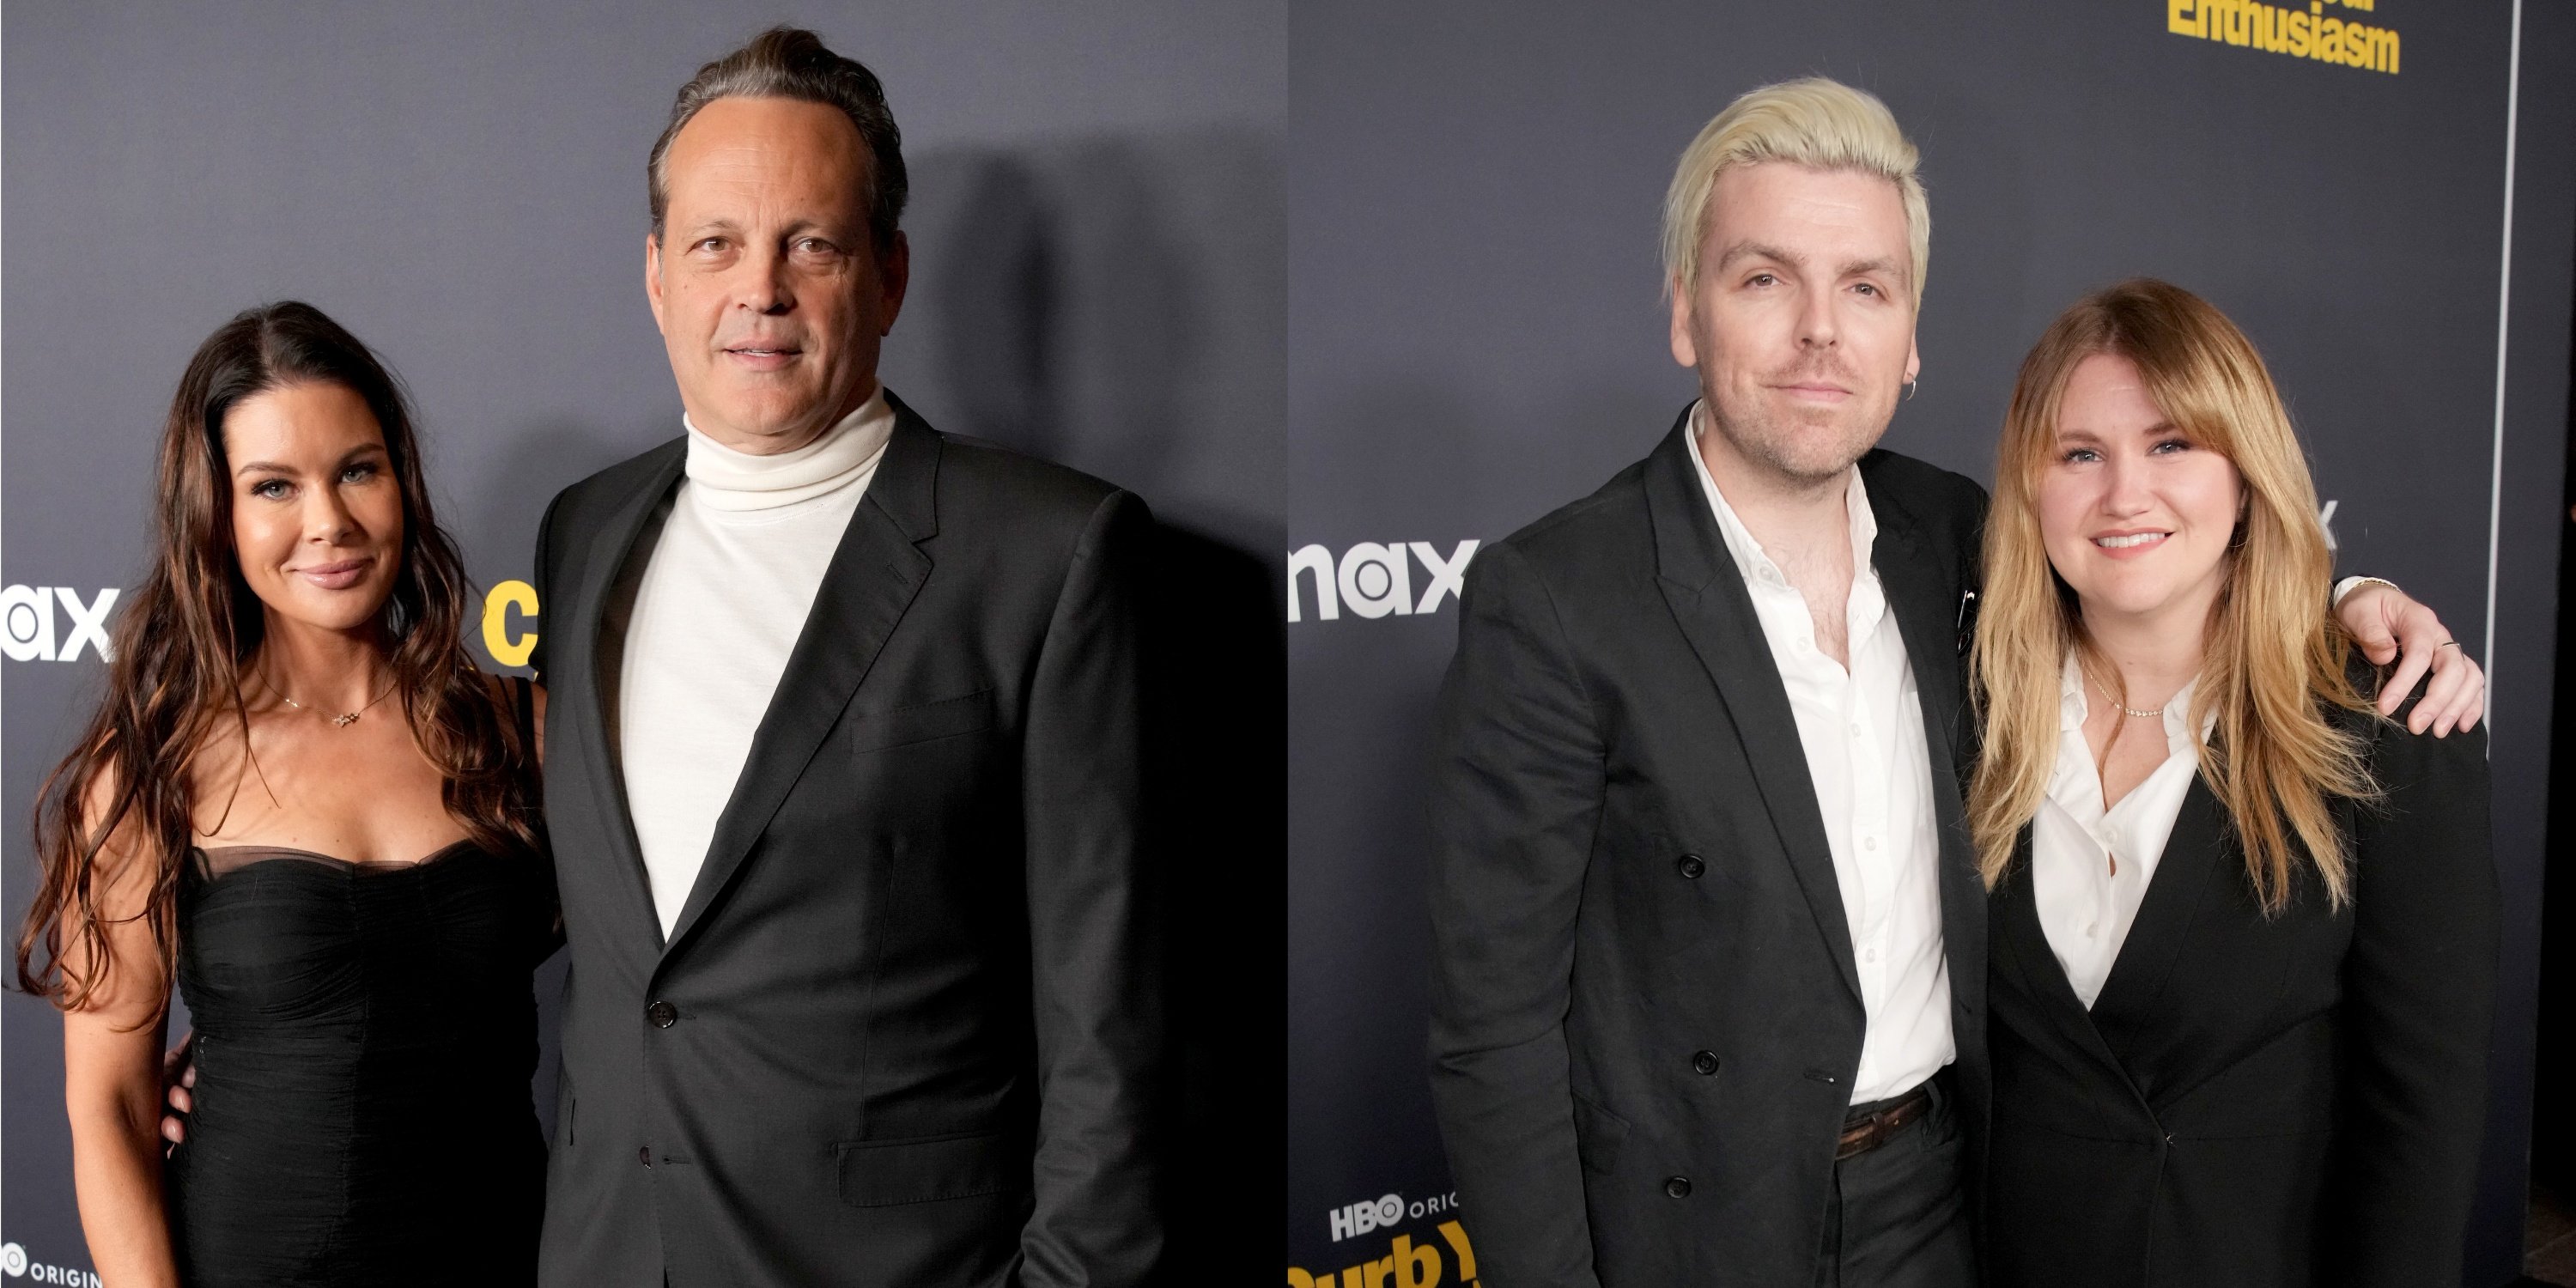 Kyla Weber, Vince Vaughn, Luke McGarry, and Jillian Bell smile at the Curb Your Enthusiasm Season 12 premiere